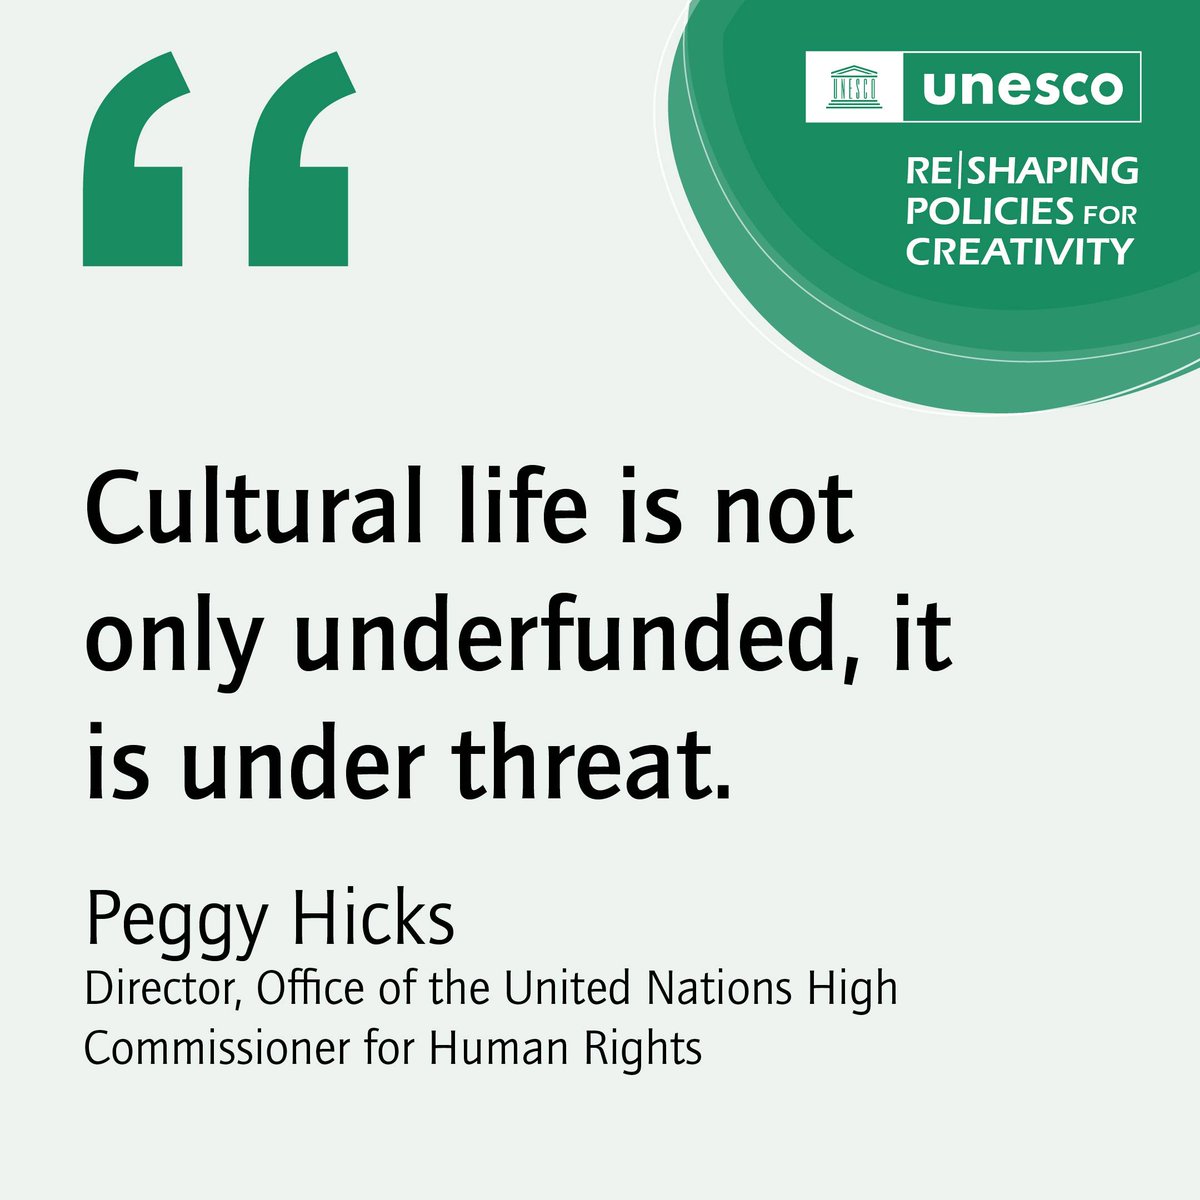 How do we eliminate threats to cultural life? 

Read the new UNESCO Re|Shaping Policies for Creativity report to find out: unes.co/reshaping2022 #SupportCreativity